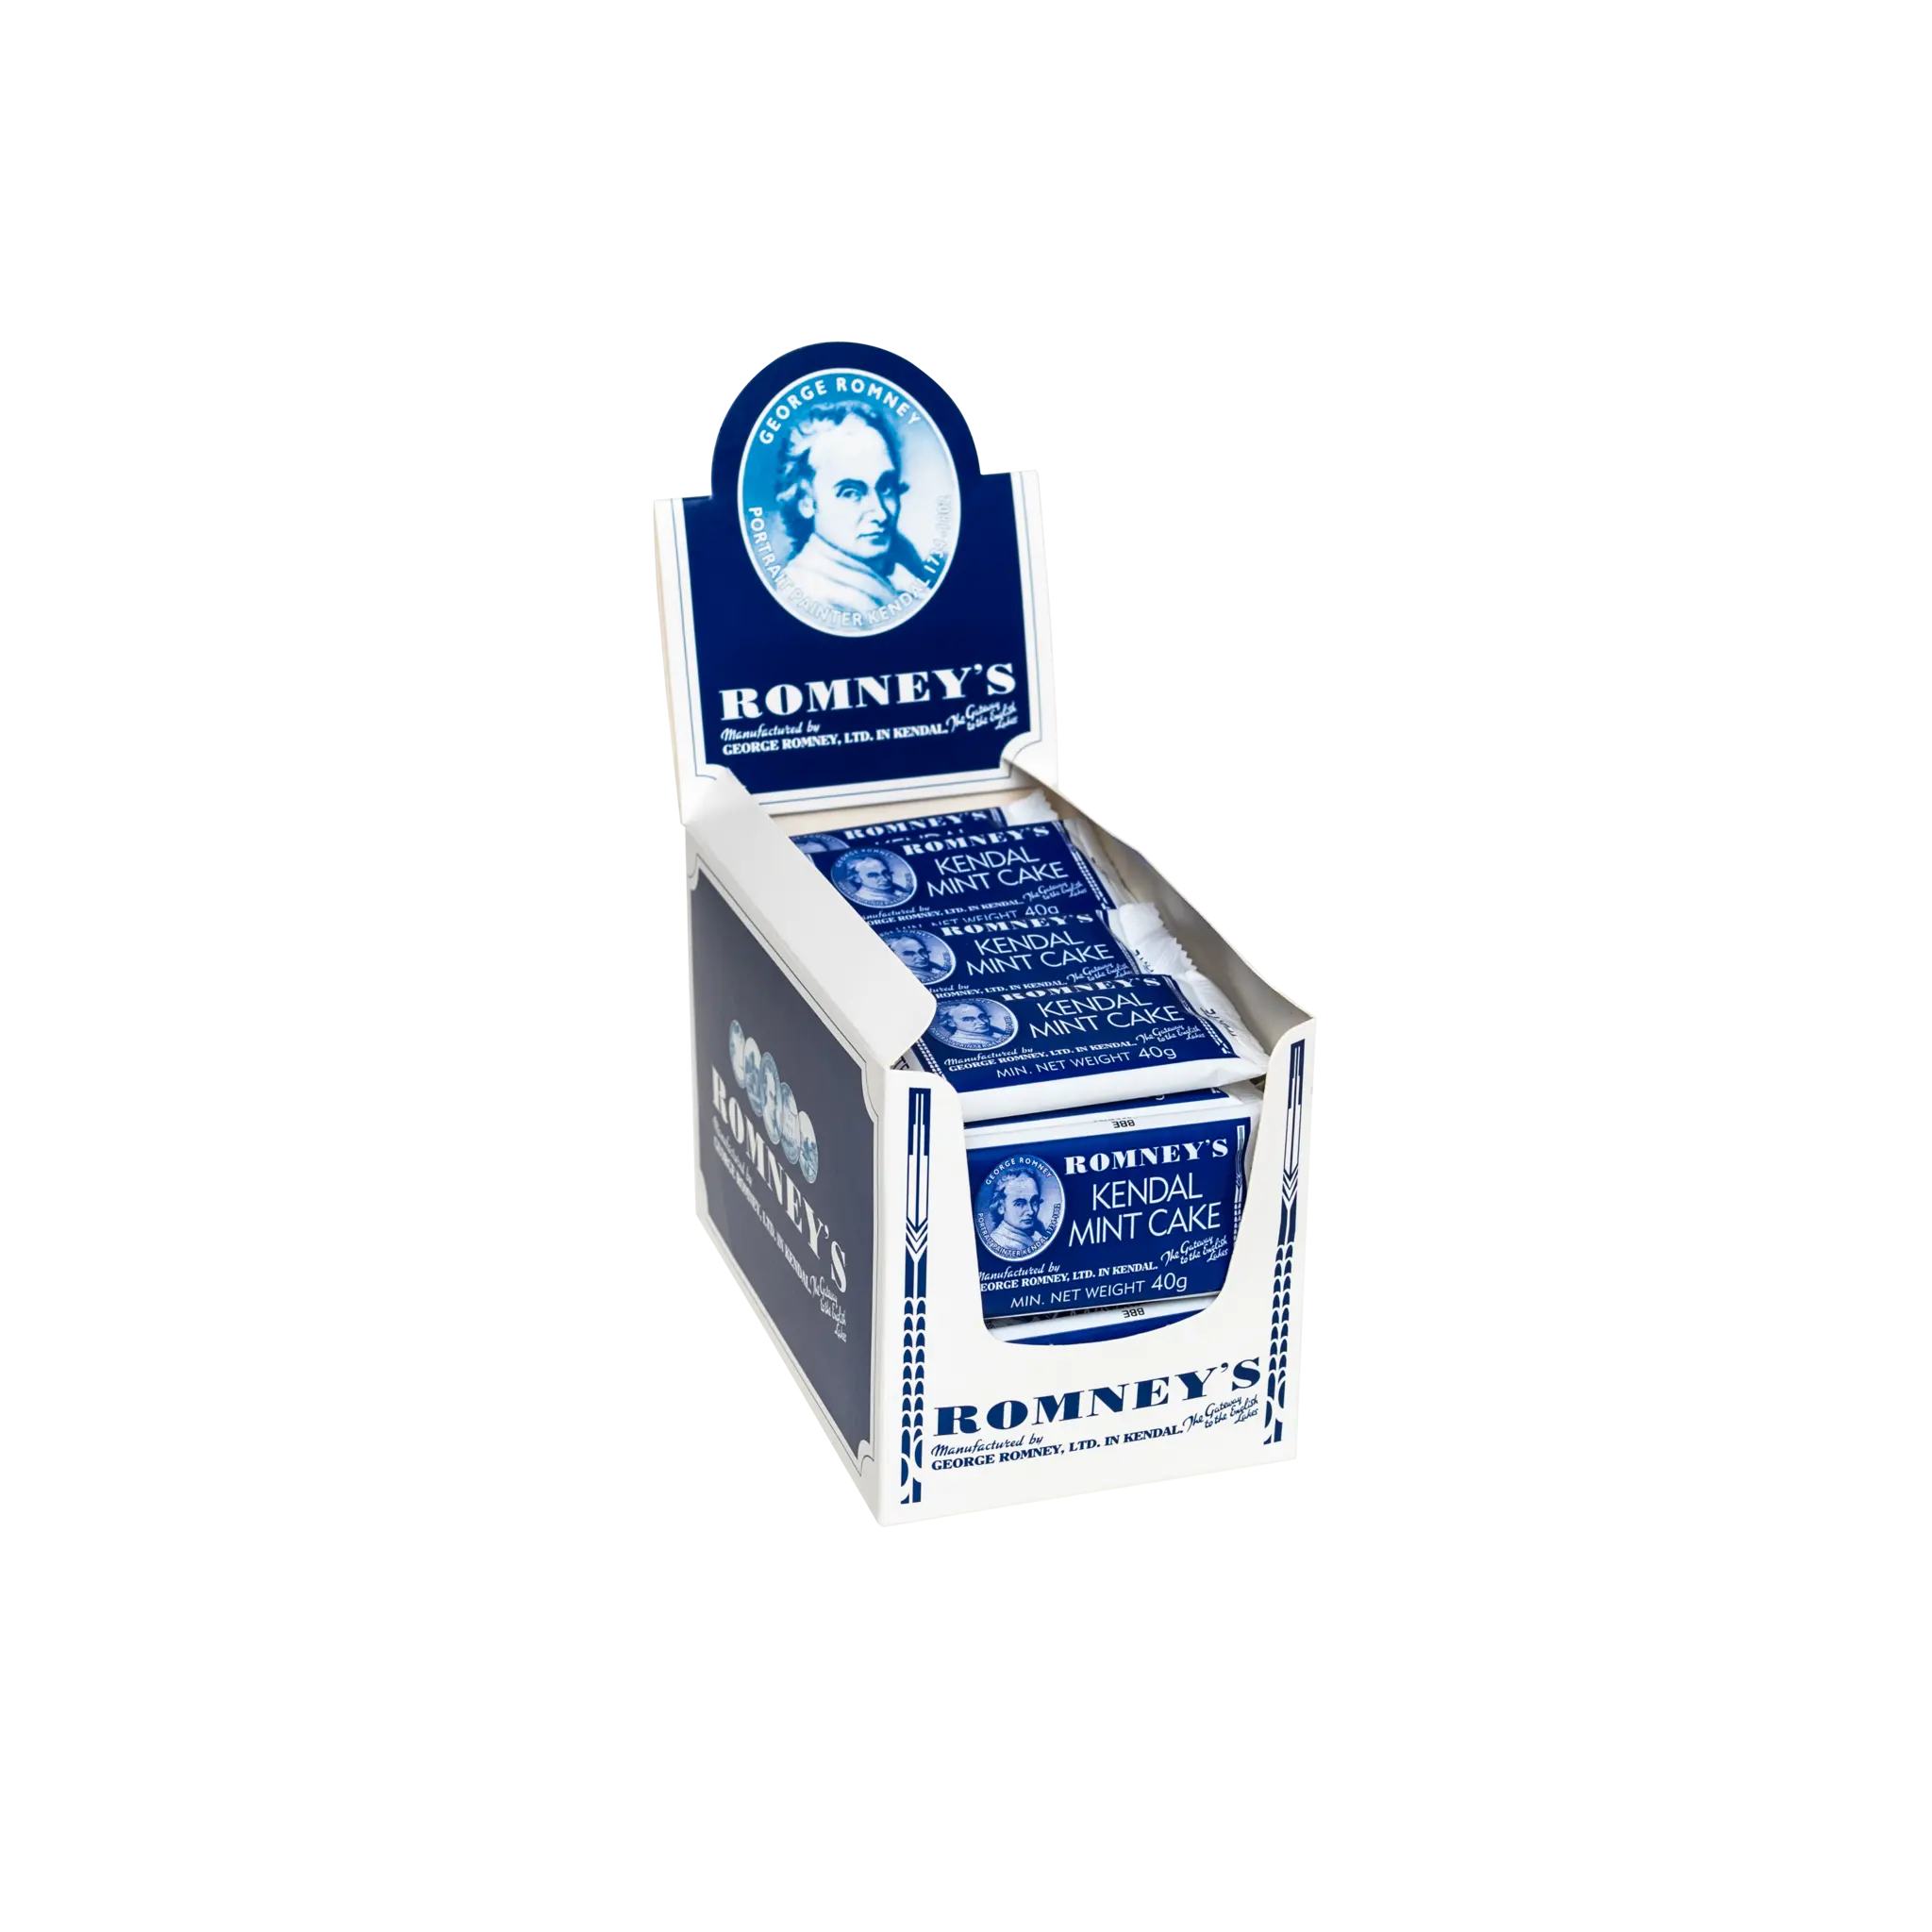 A product image showing an open cardboard box which is used to display products on a shelf and is white and blue. The box contains 40g bars of Romney's White Kendal Mint Cake which is in a blue and white wrapper.